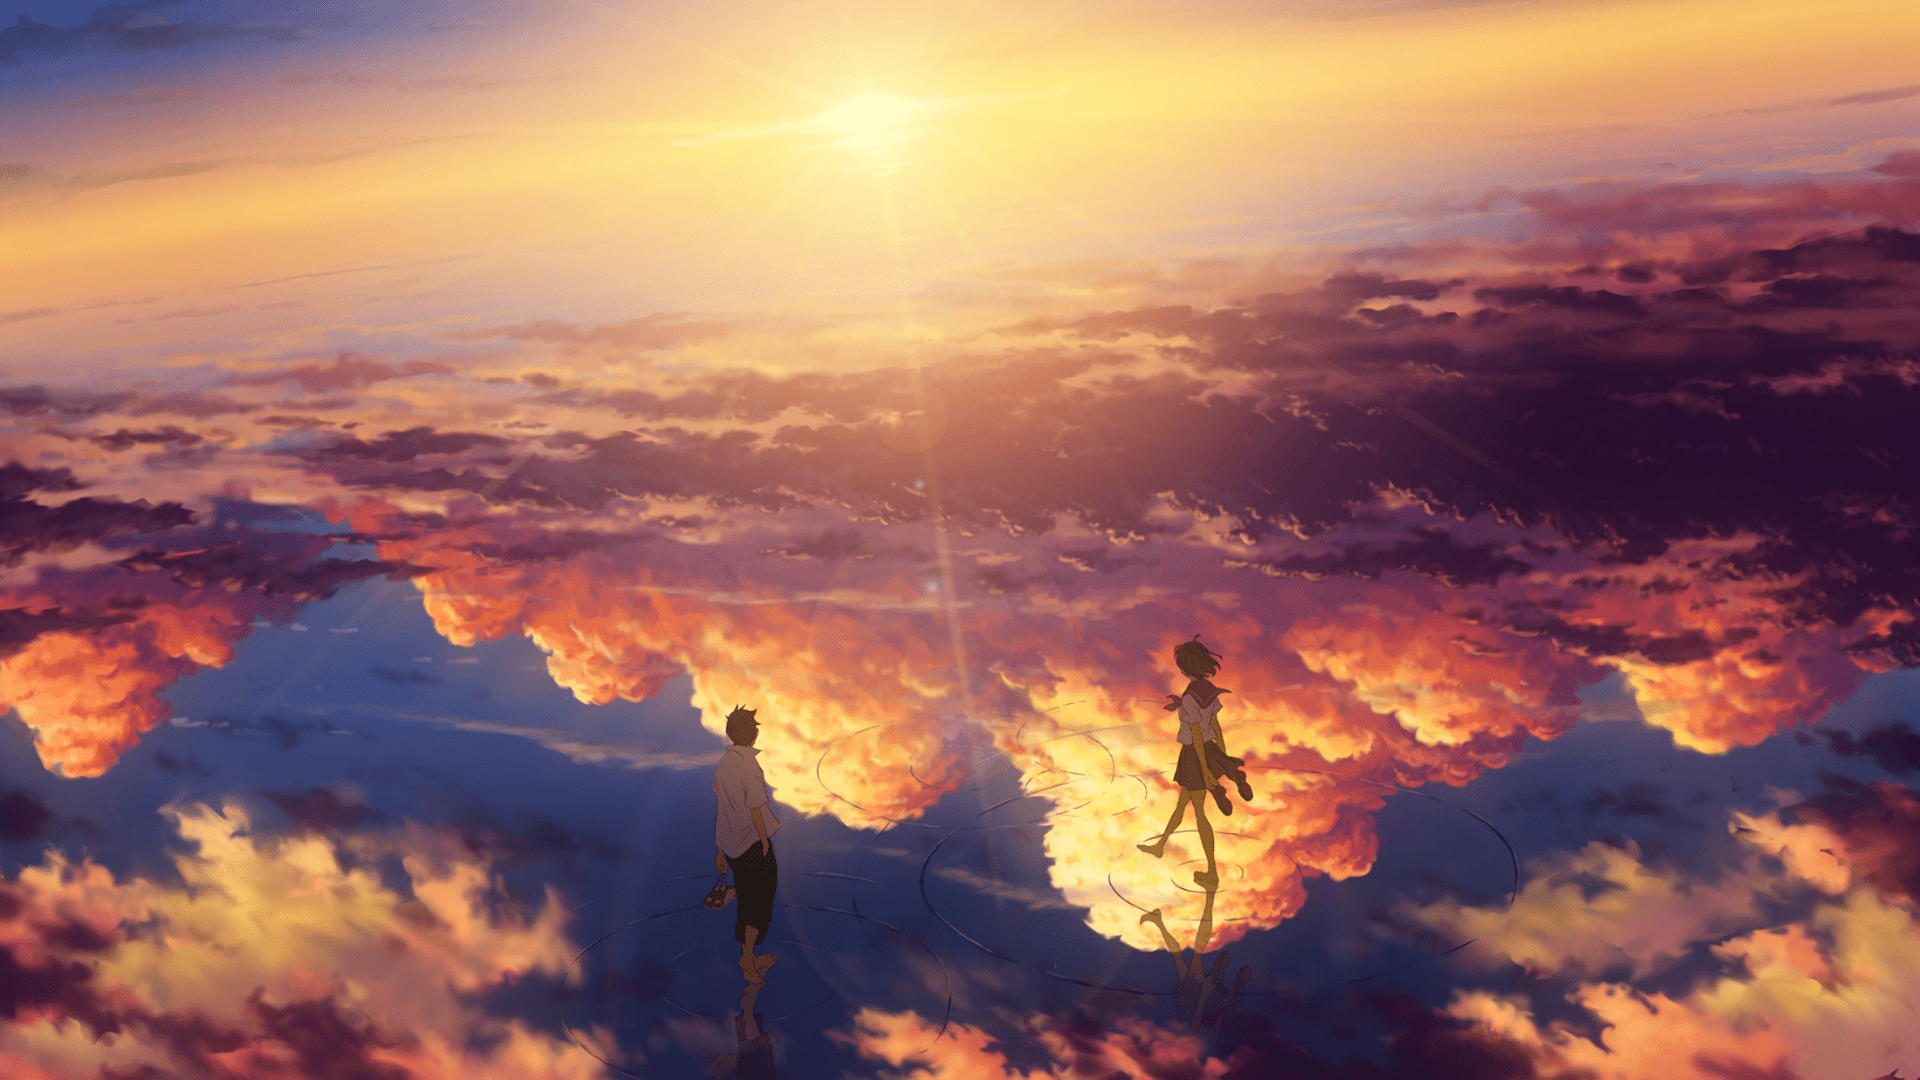 A couple of people walking on clouds - Anime sunset